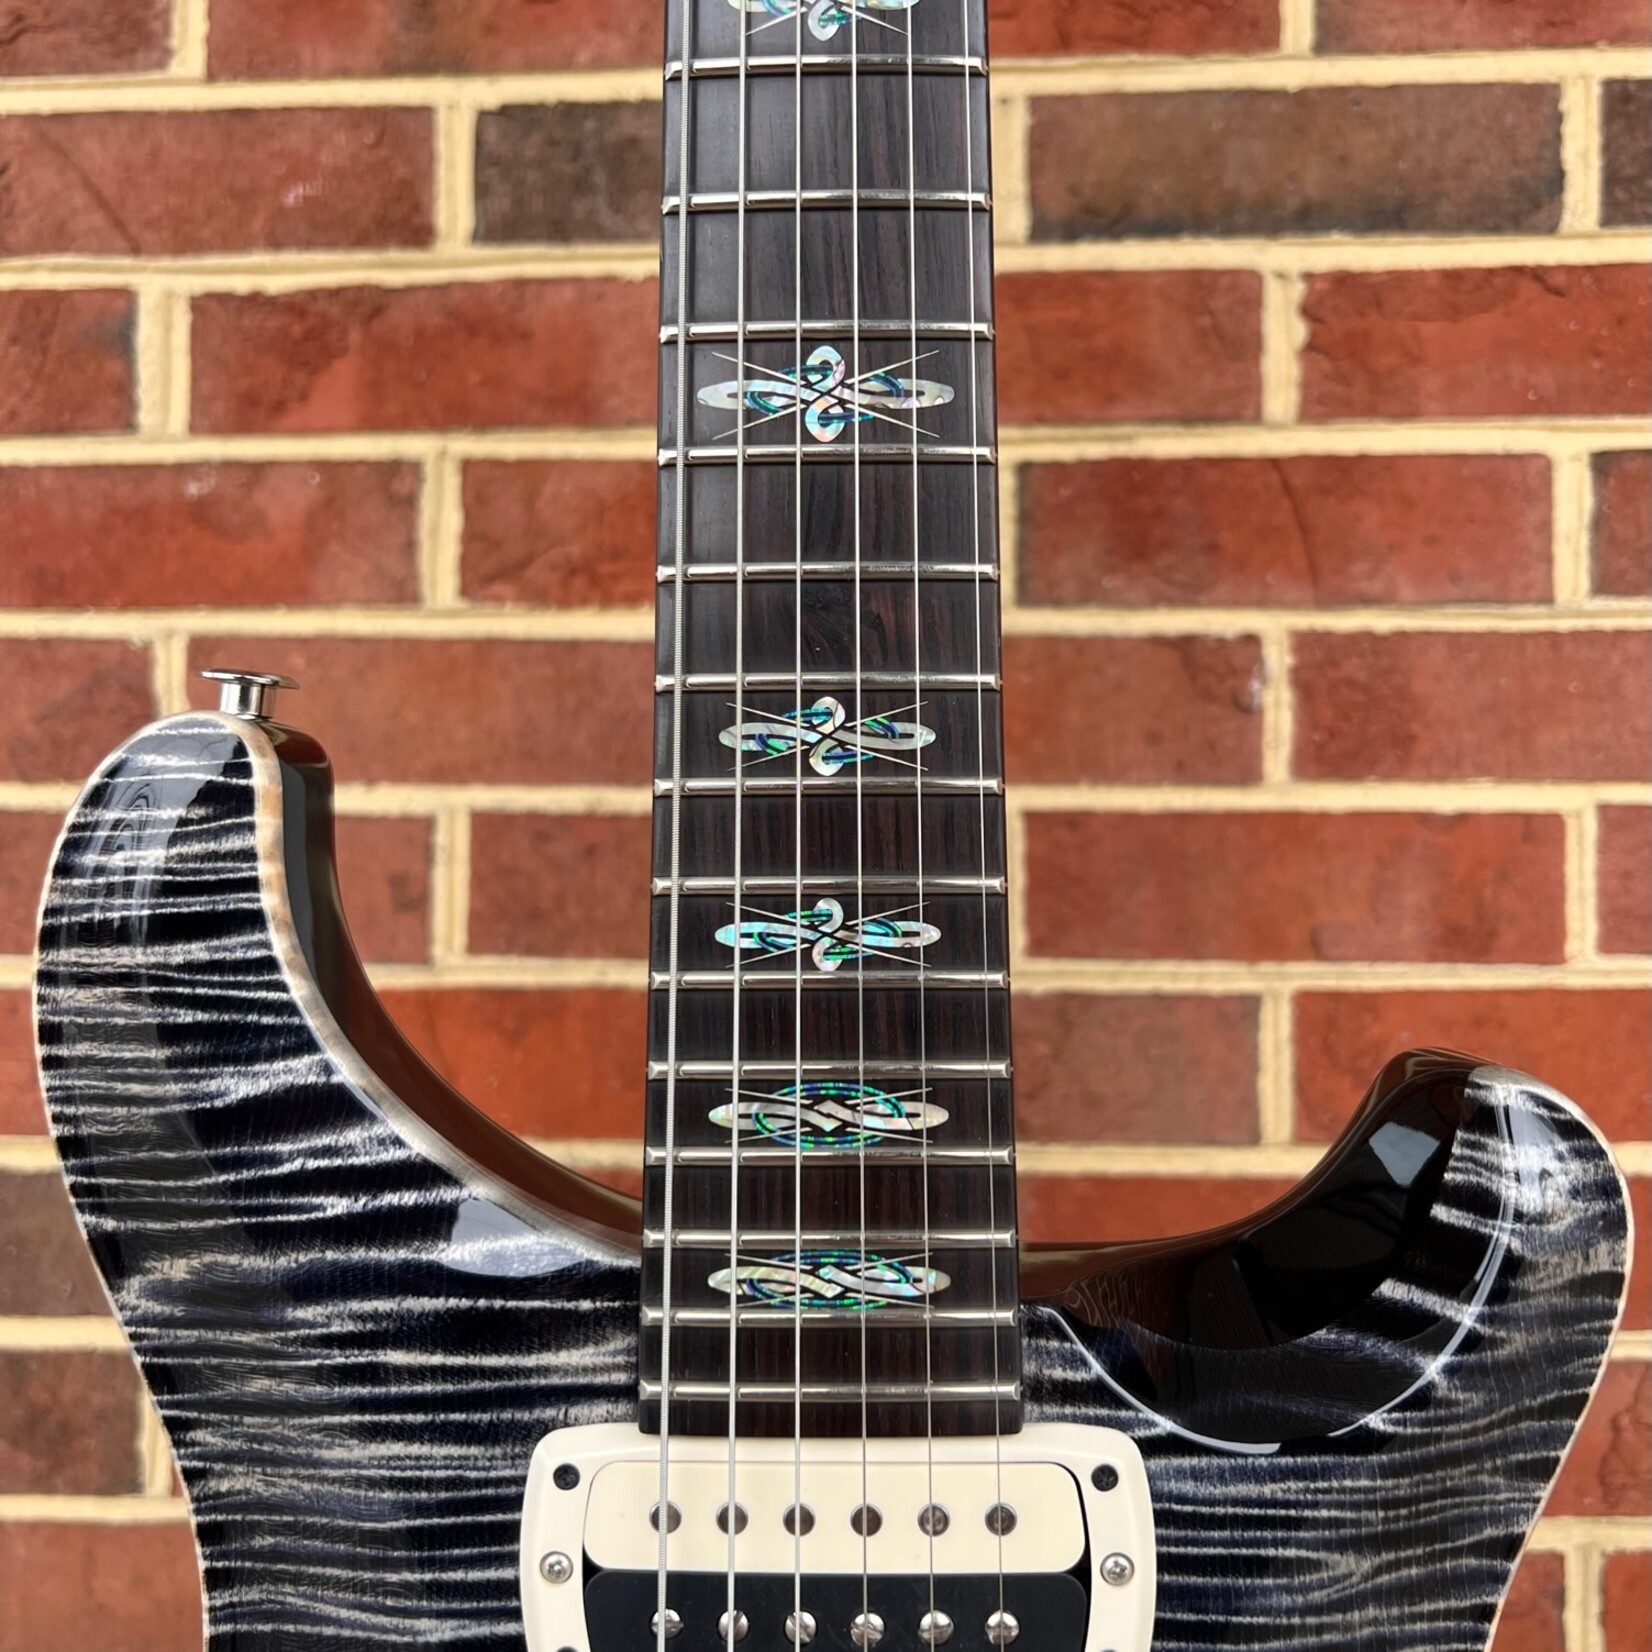 Paul Reed Smith Paul Reed Smith Private Stock John McLaughlin Limited Edition, 1 of 200 Worldwide, Flame Maple Top, African Mahogany Body, Hormigo Neck, African Blackwood Fretboard, Celtic Knot Inlays - Crushed Opal, Signed by John McLaughlin, Hardshell Case